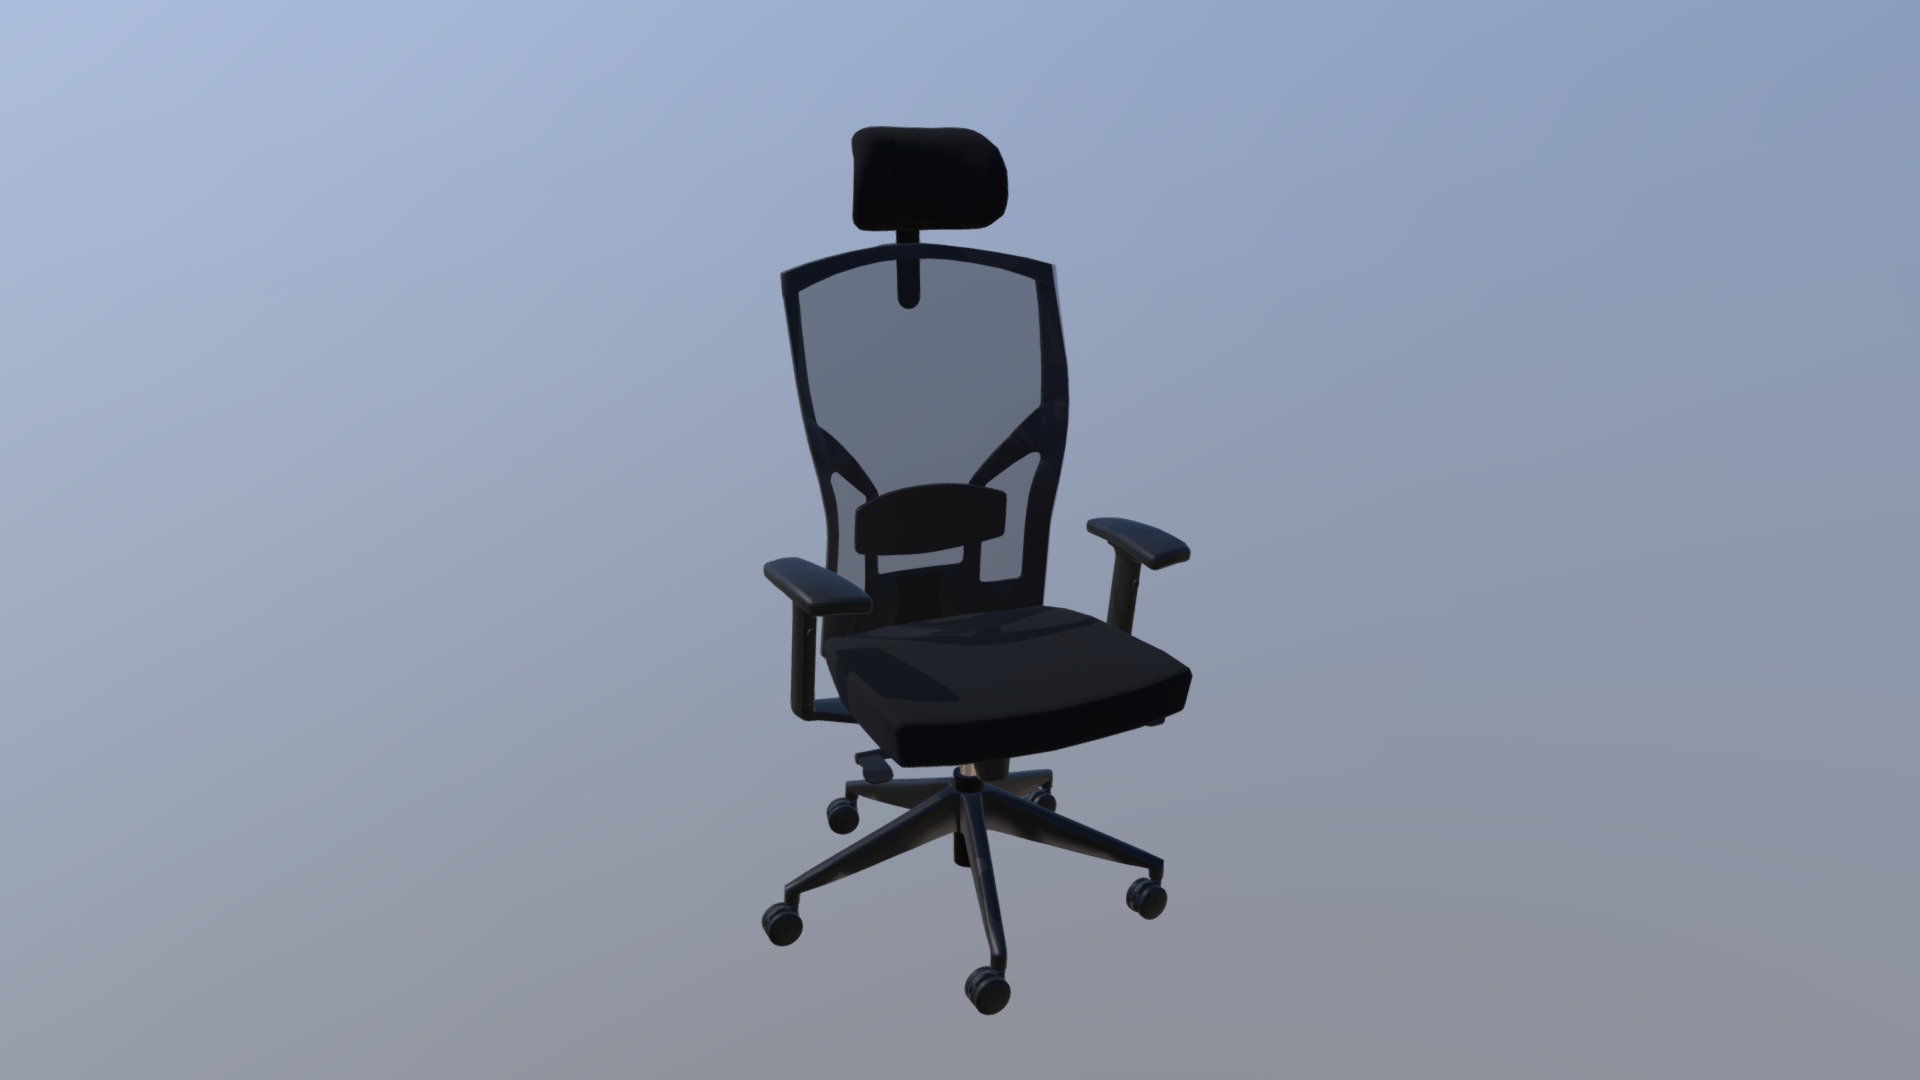 An old model I had to model up for use in many 3D Renders over the years.
Model was produced for high end renders of Commercial office furniture to help demonstrate the tables and workstations in use or for marketing of the chair product itself.

This Model was modeled in 2014 - Valet Chair - 3D model by David Cooper (@majikstan) 3d model